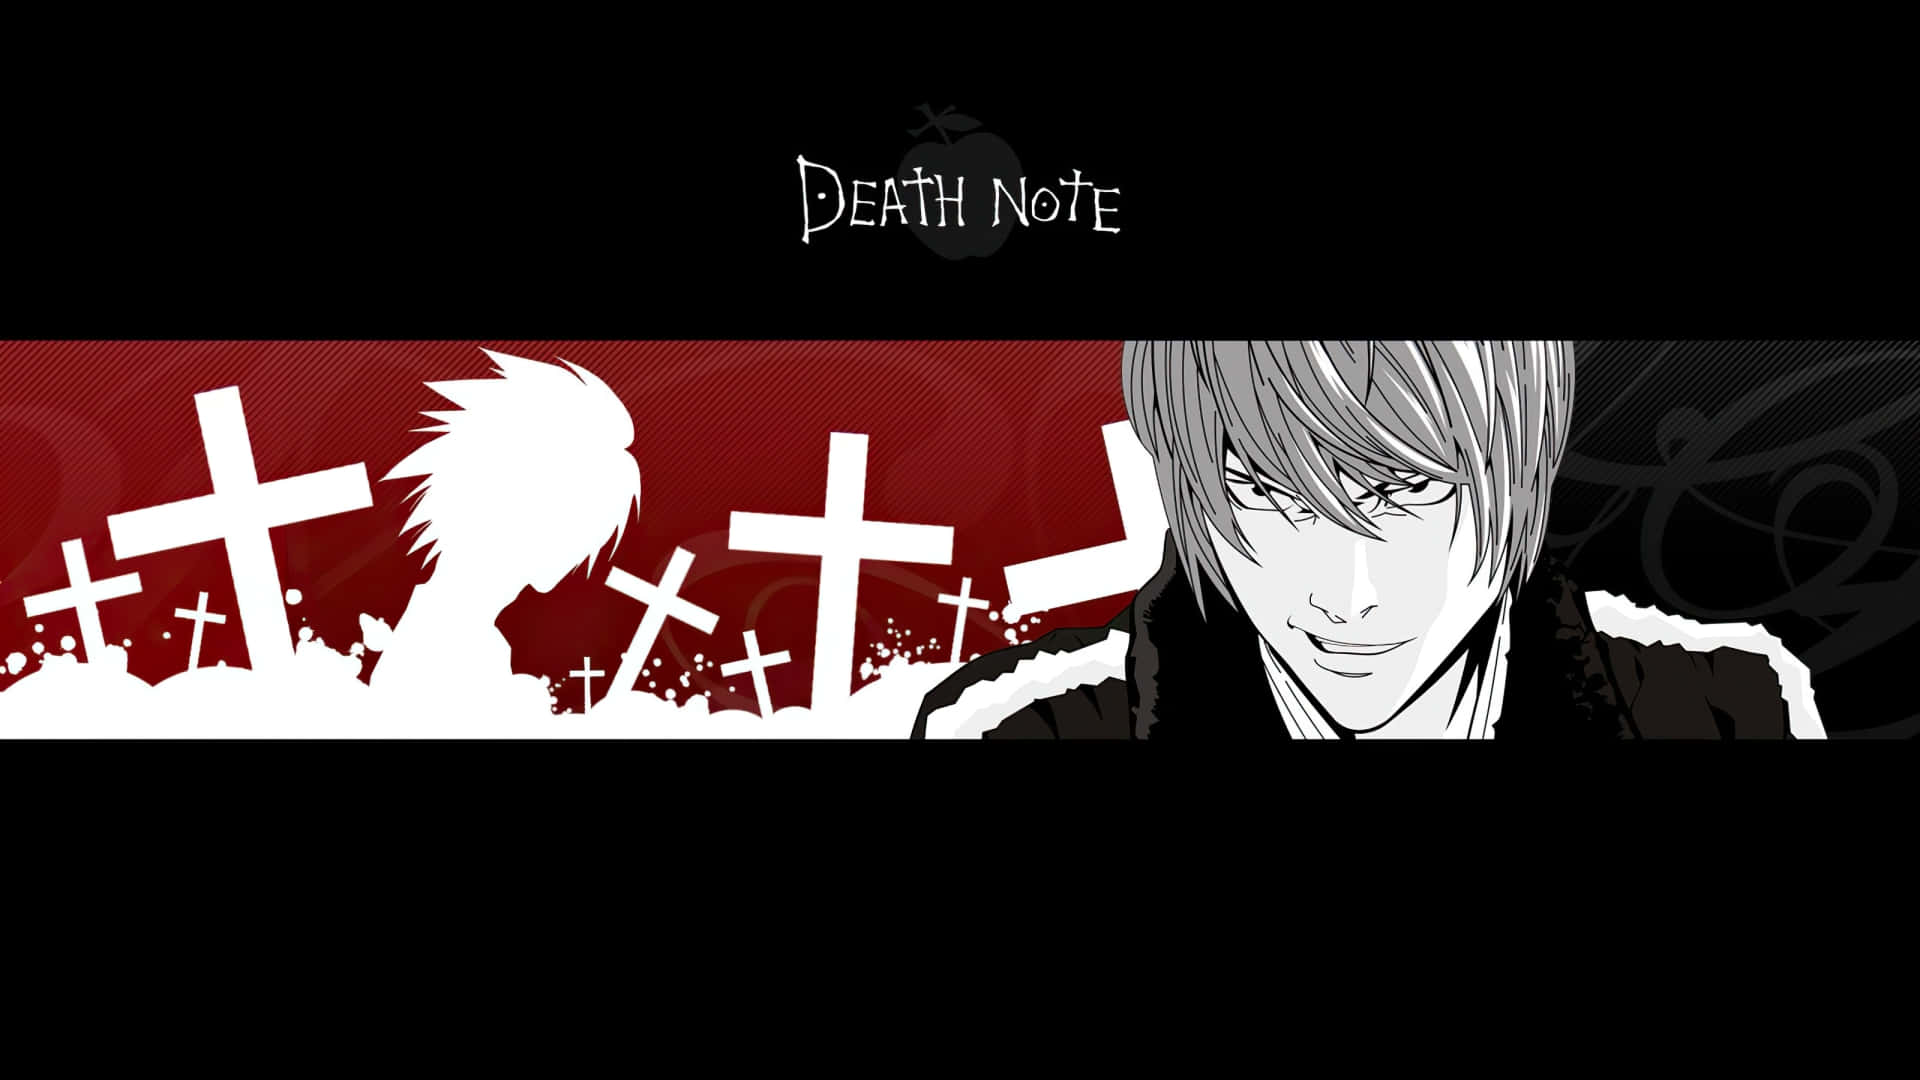 Light Yagami's Battle for the Death Note